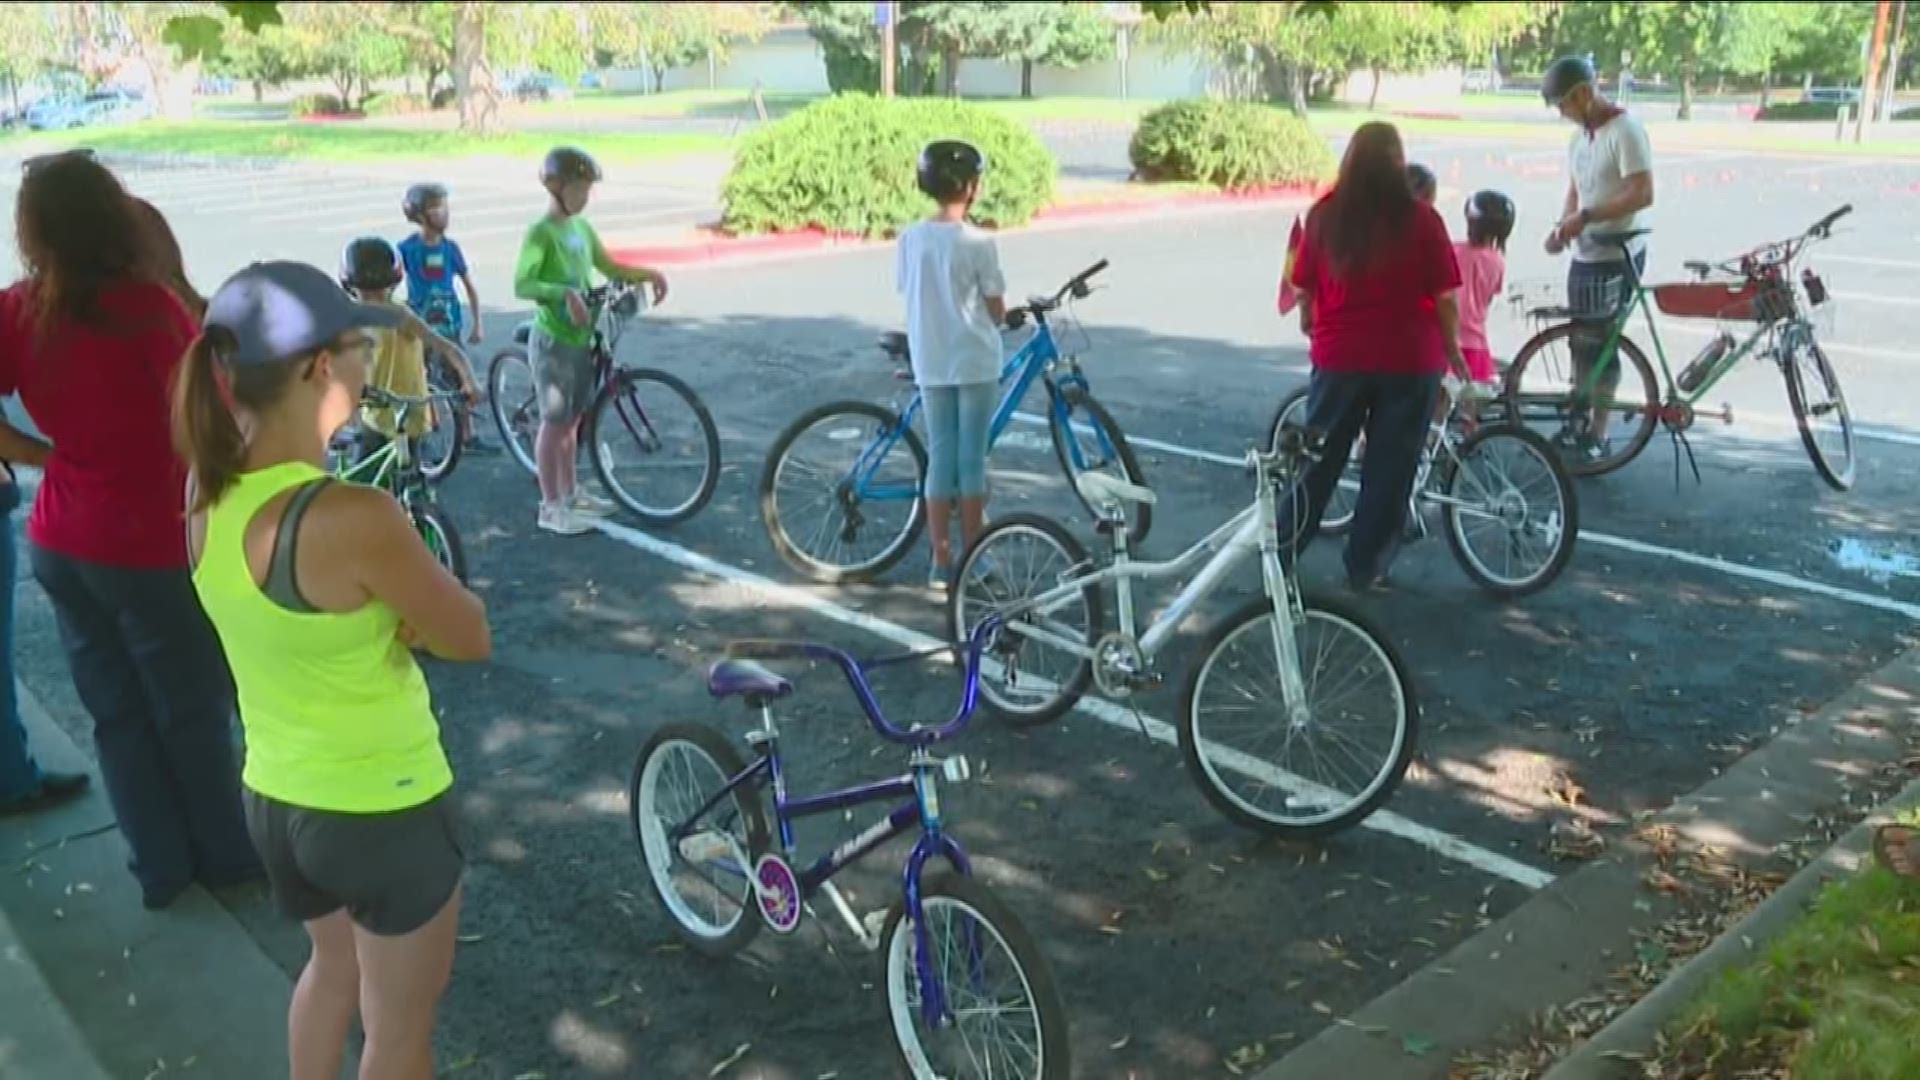 On Saturday, a group of kids got a new set of wheels thanks to the Boise Bicycle Project. Jimmy Hallyburton, the founder of BBP, says the bicycles will help the refugee kids get around and become a part of the community that they're new to.